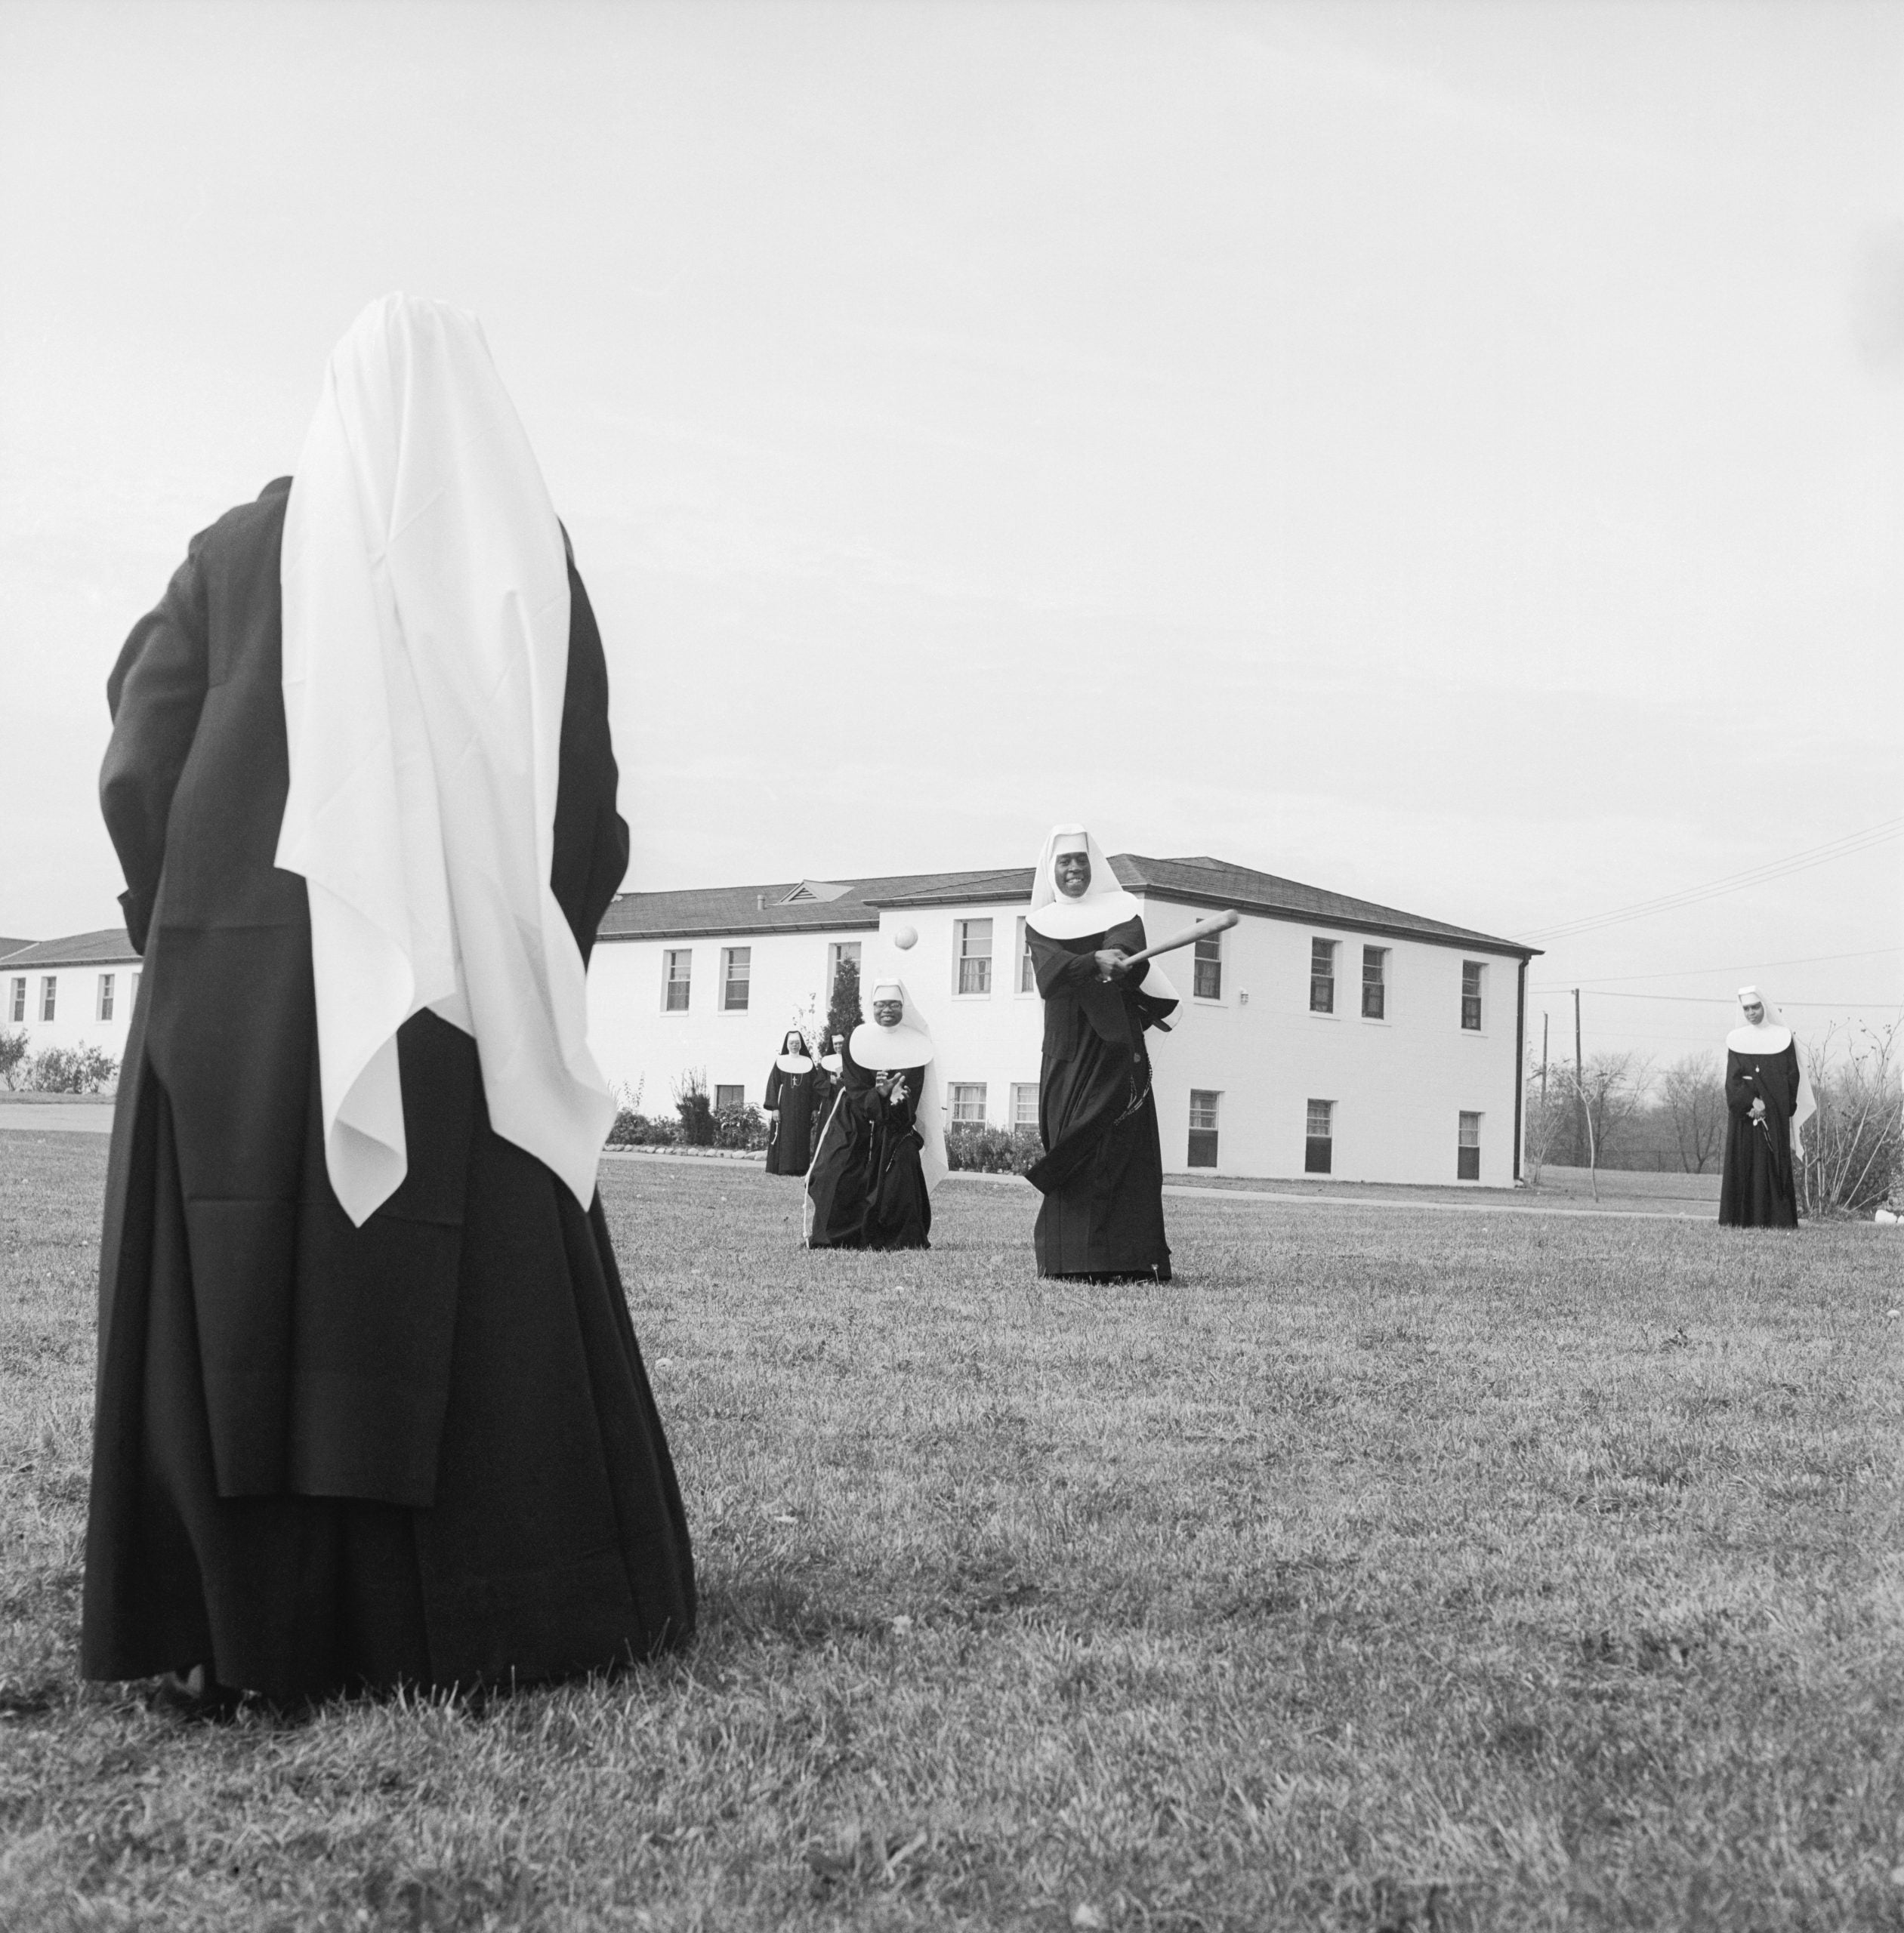 Forgotten Prophets & Feminist Icons: Why We All Need To Know The Story of Black Nuns